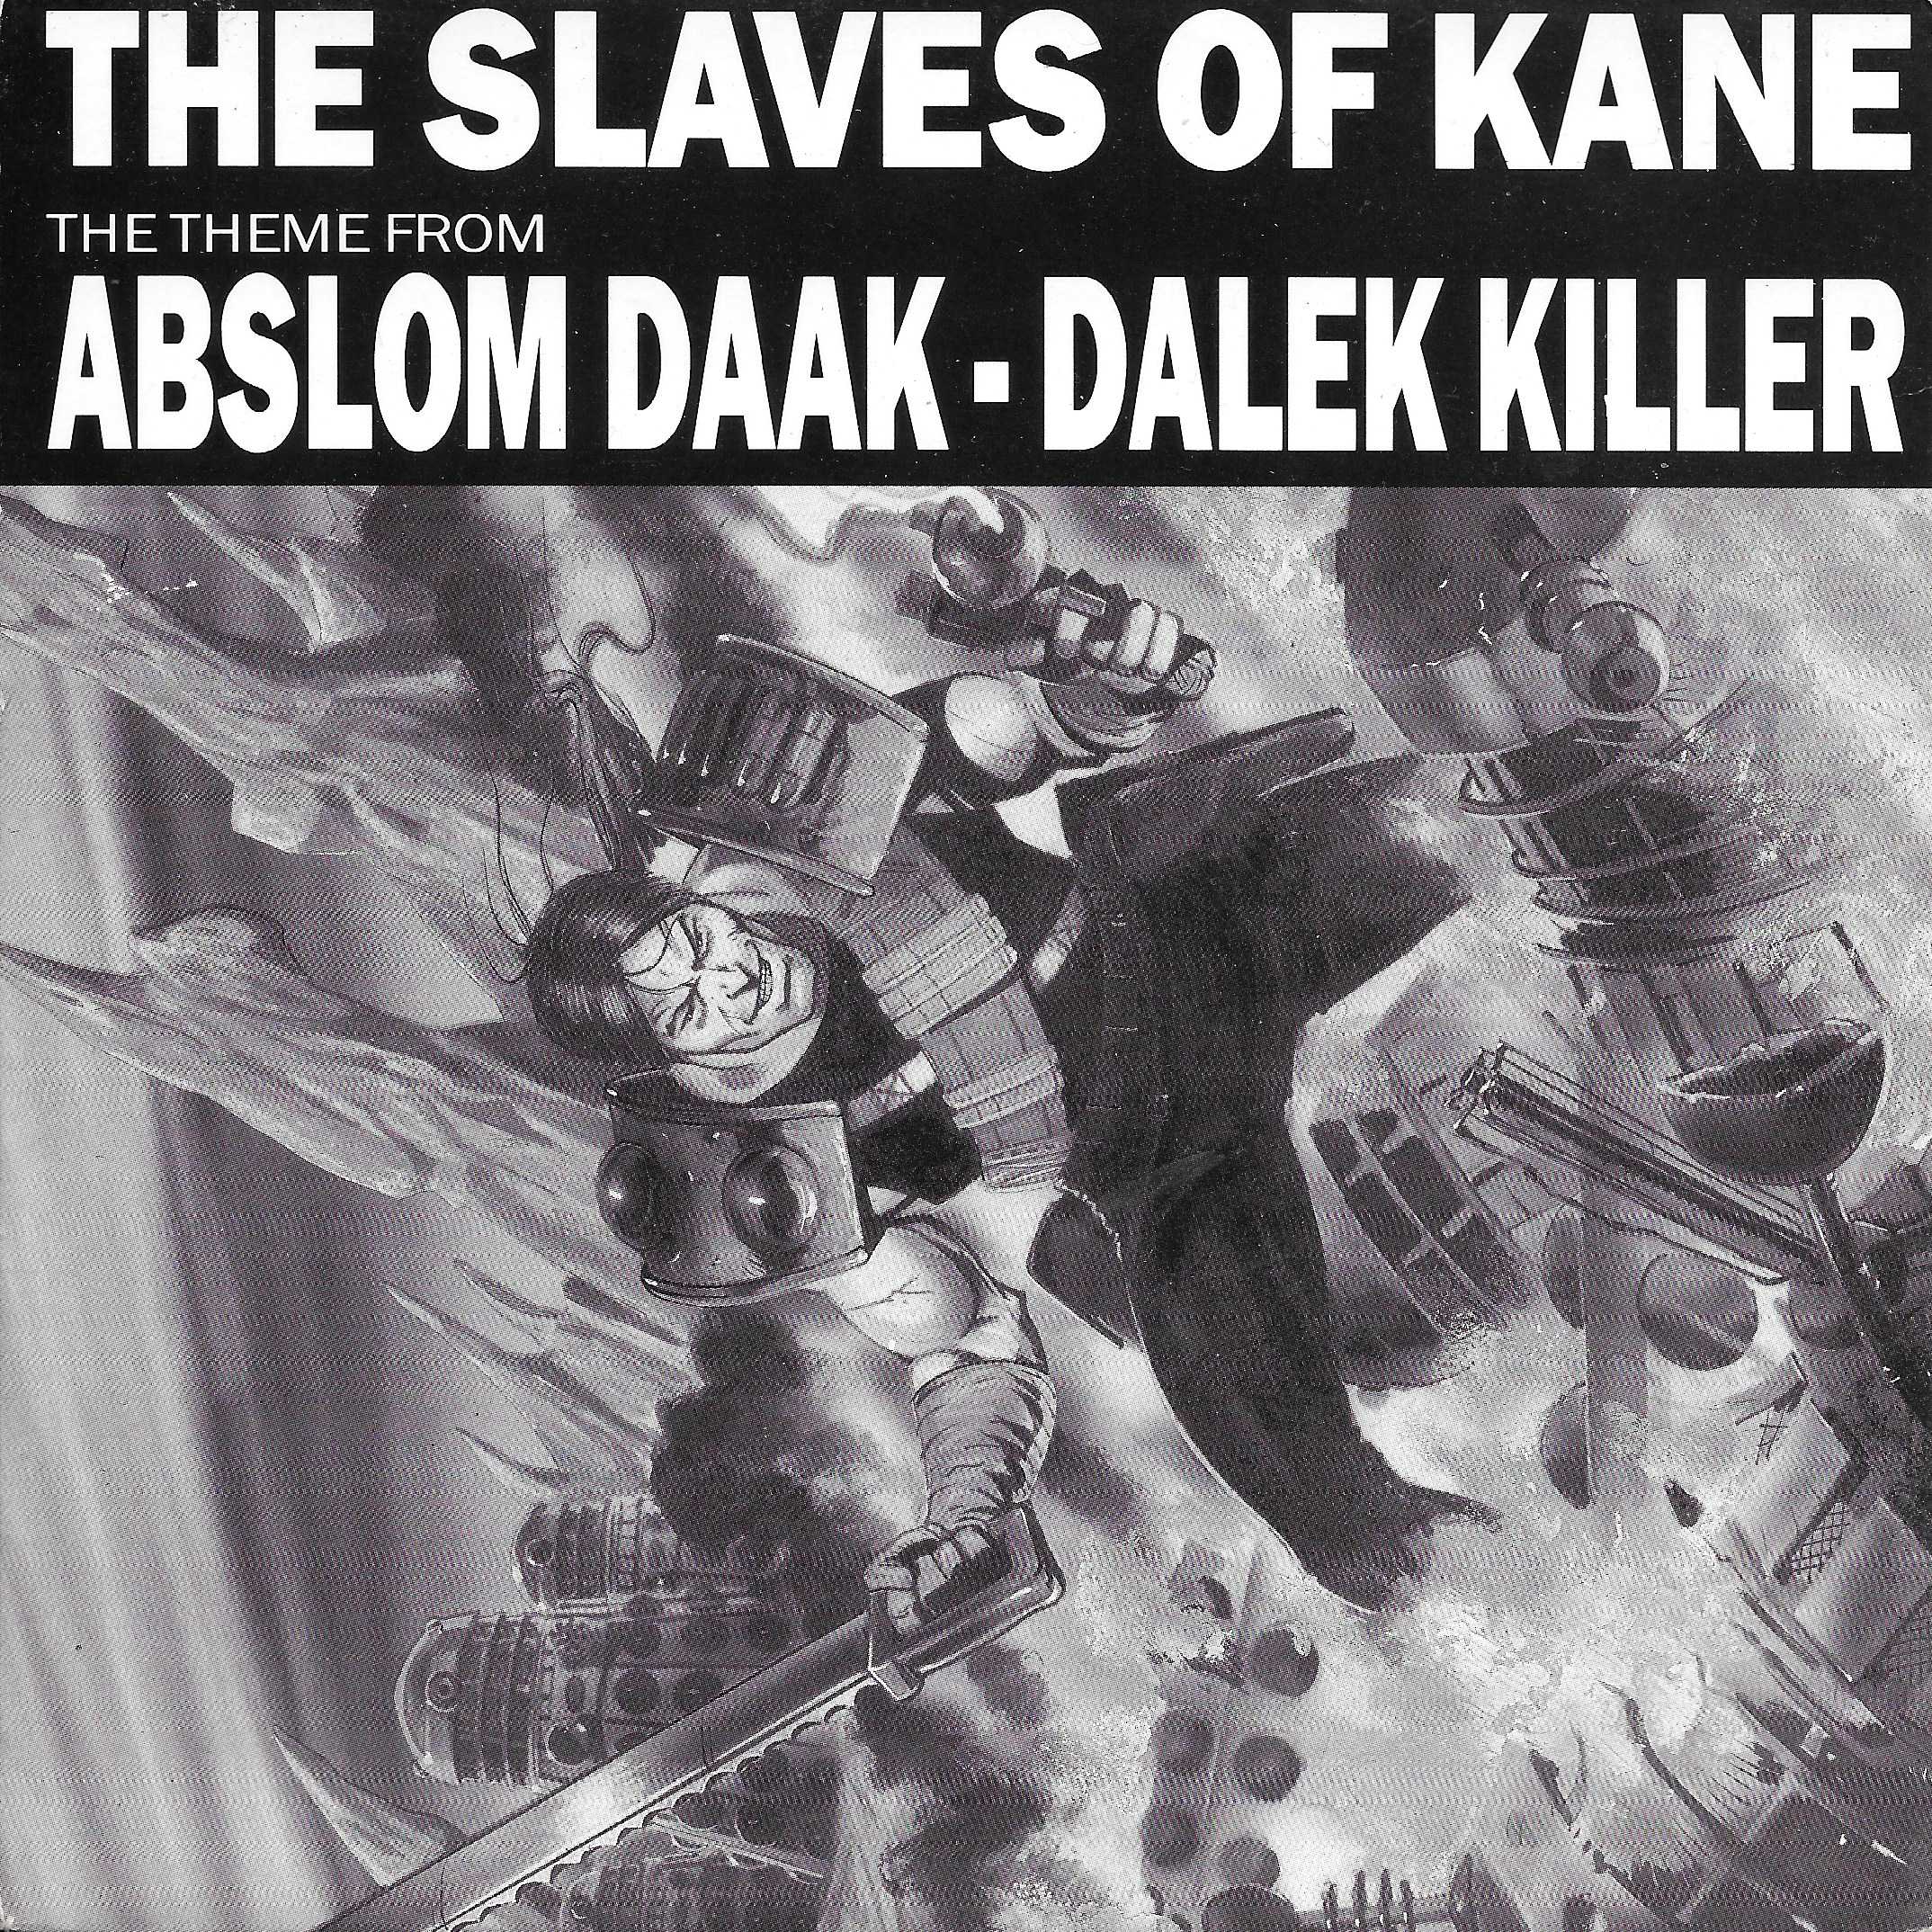 Picture of XEN - 2 The slaves of Kane \(Abslom Daak - Dalek killer\) by artist Dominic Glynn from the BBC records and Tapes library